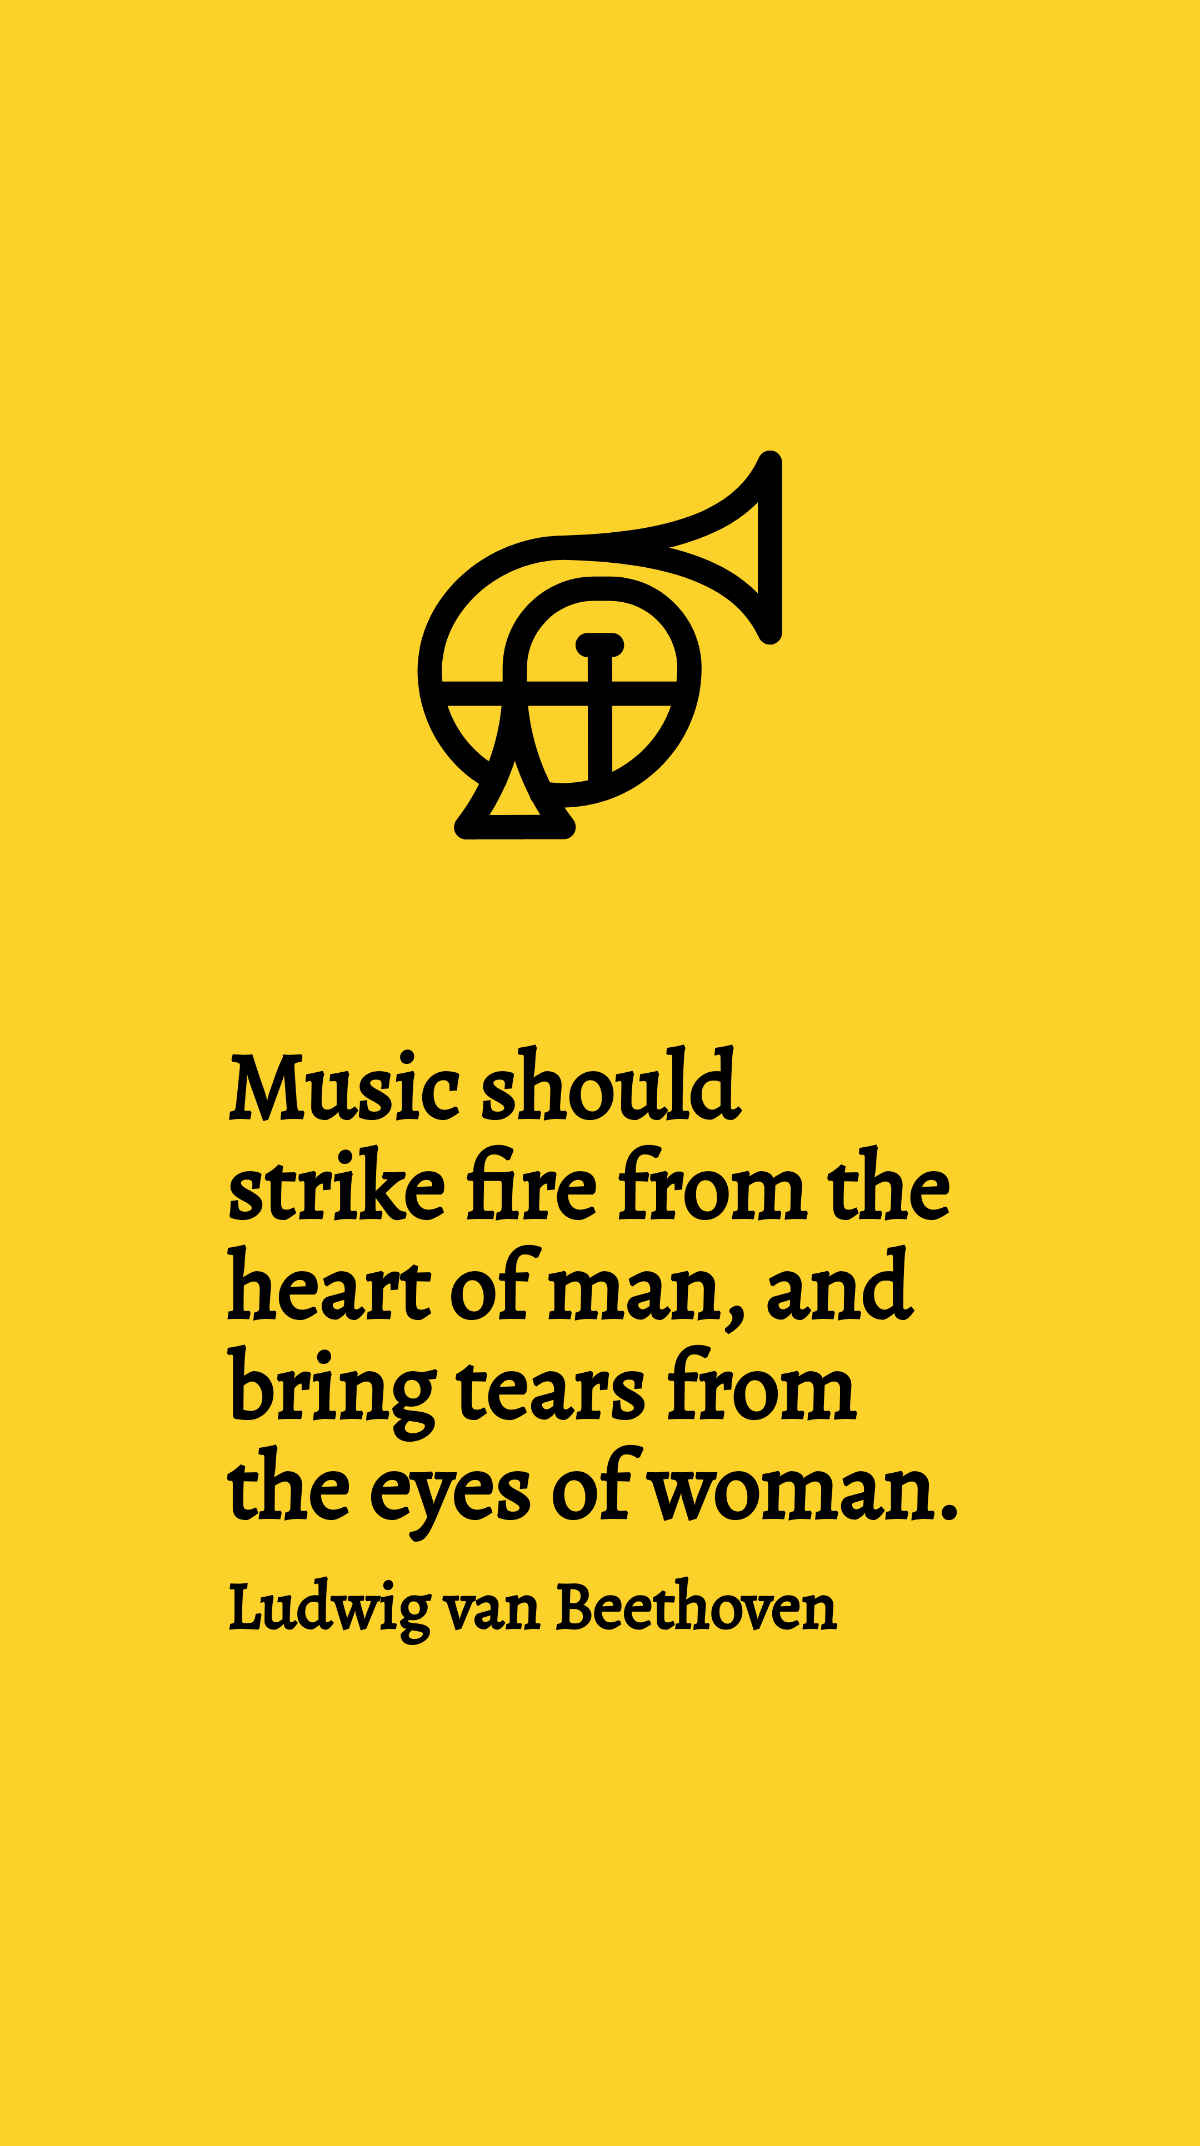 Ludwig van Beethoven - Music should strike fire from the heart of man, and bring tears from the eyes of woman. Template